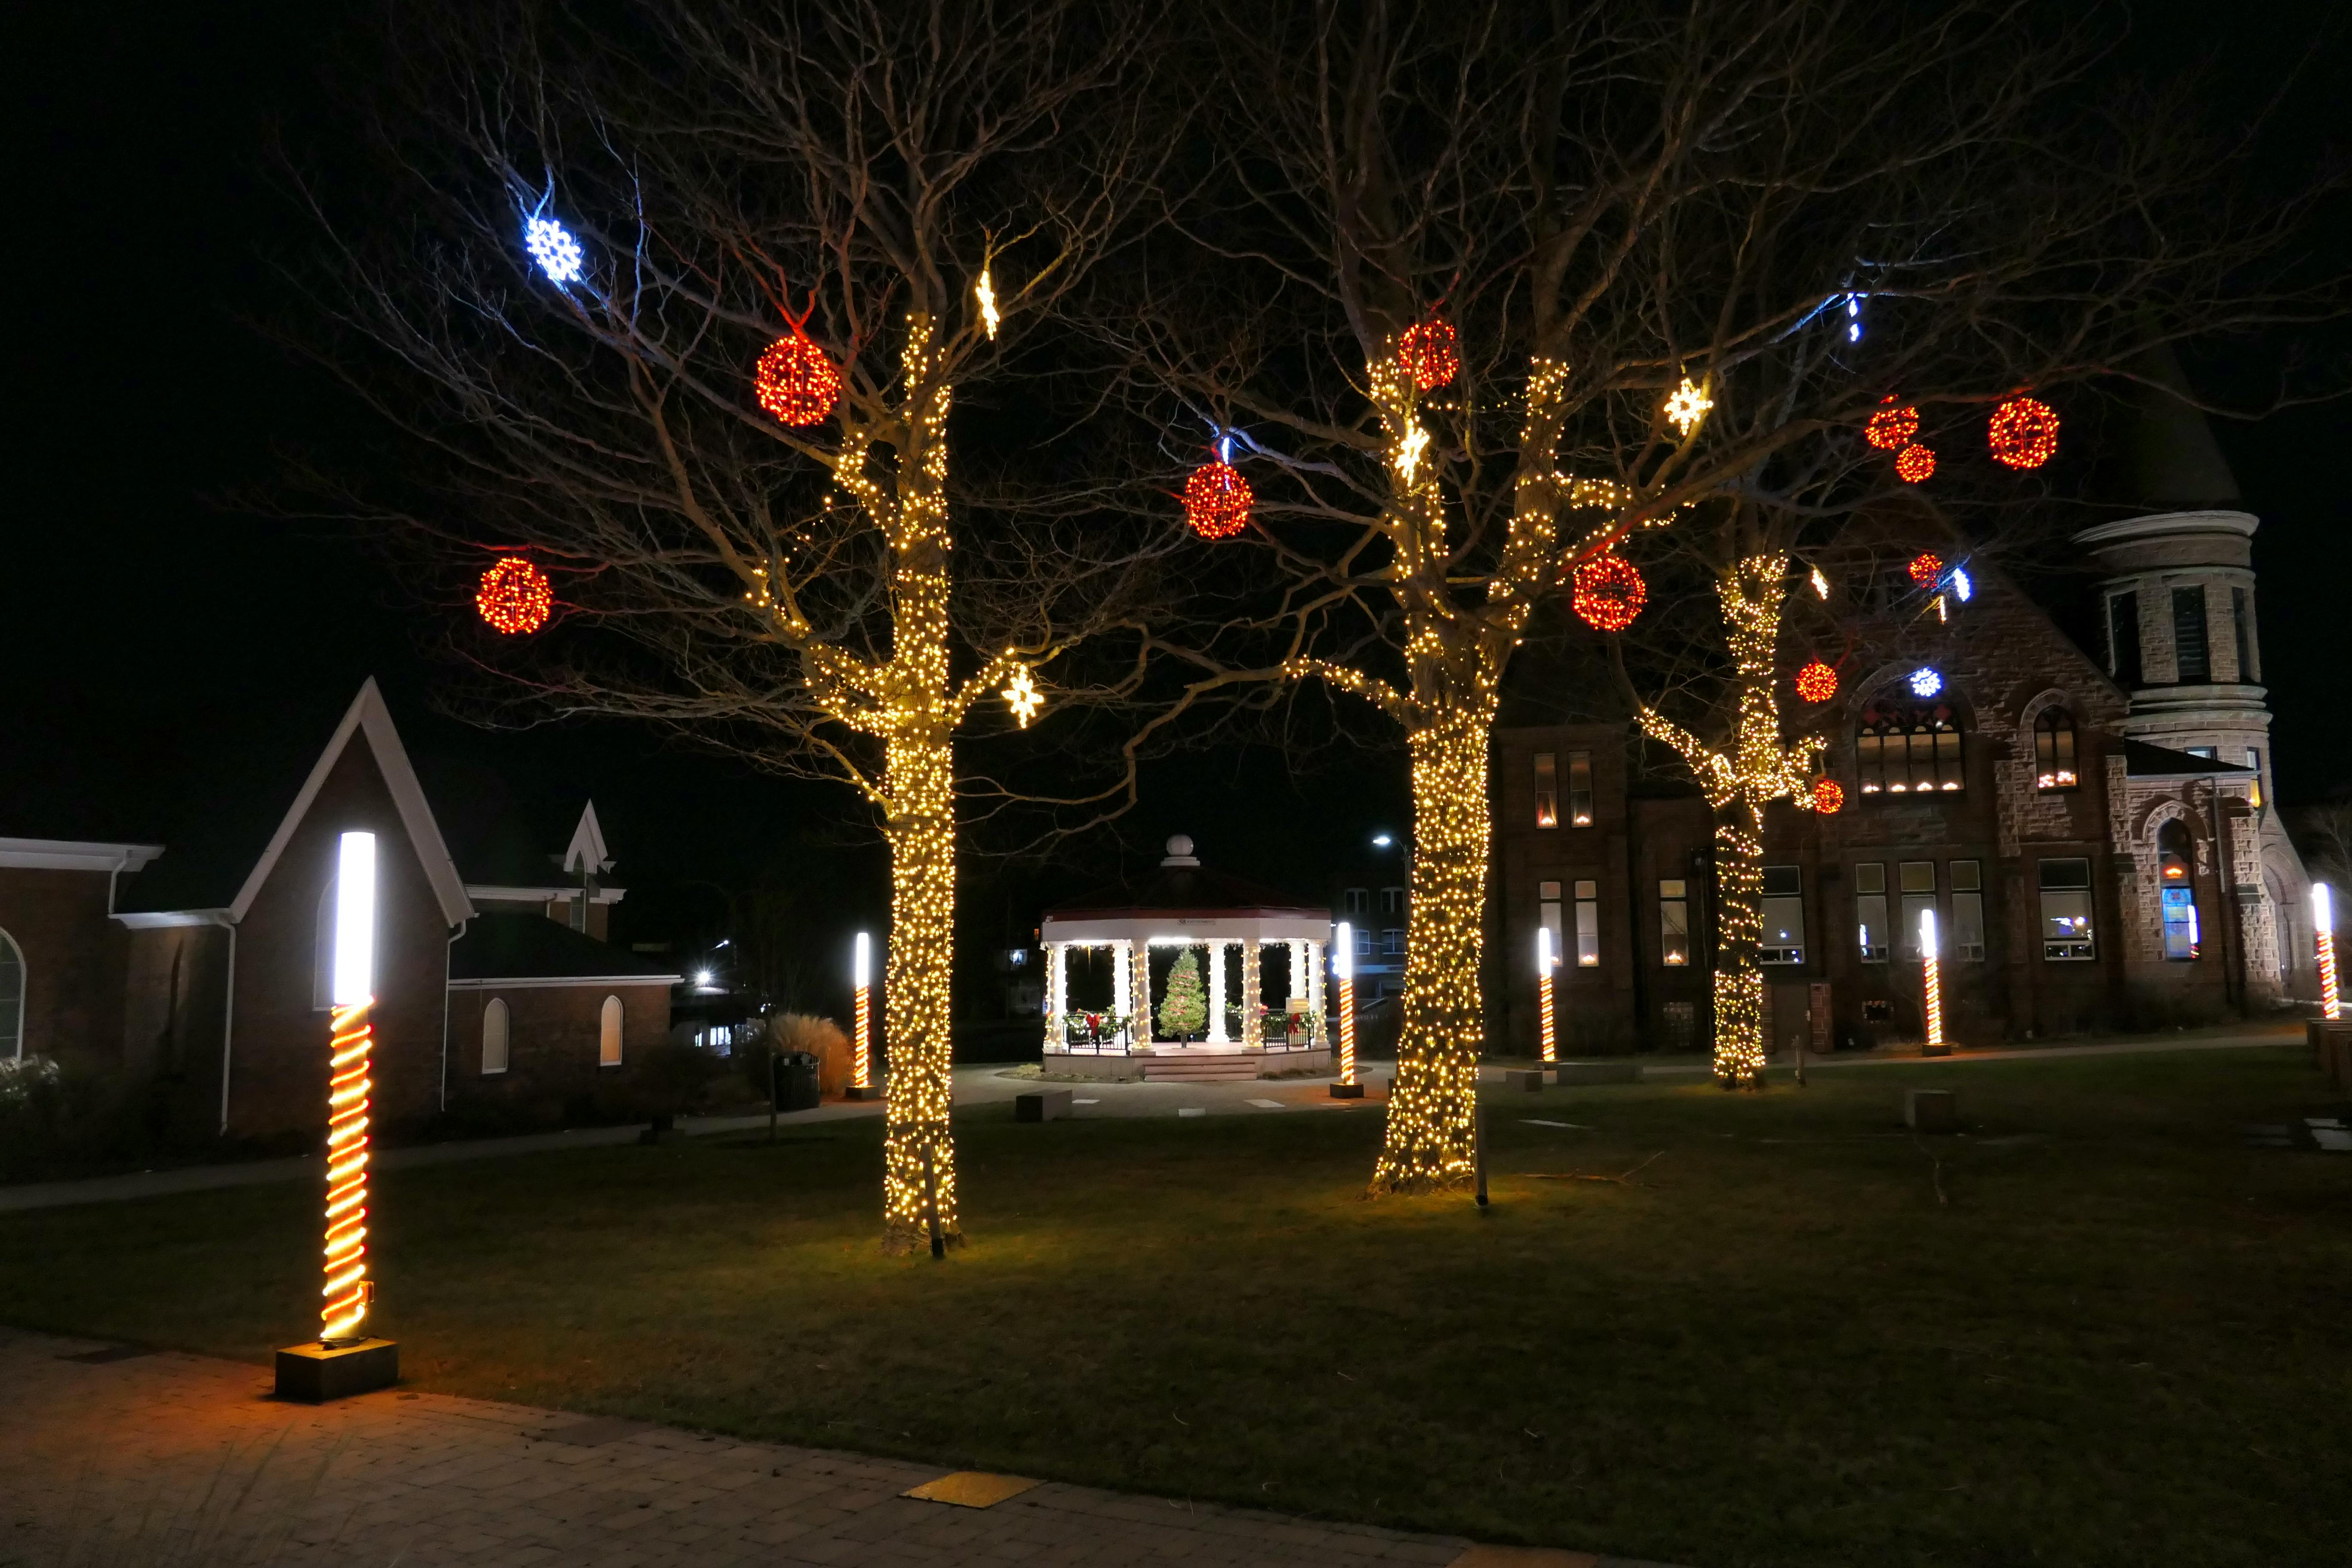 Today’s holiday snapshot was taken at Victoria Square in Amherst, N.S., by Donna Langille. Donna said the square is always nicely decorated for the holiday season. I must say, it looks like a great spot for an evening walk while taking in the sights and sounds of the holiday season. Merry Christmas, Donna, and thank you for sharing this photo with me.